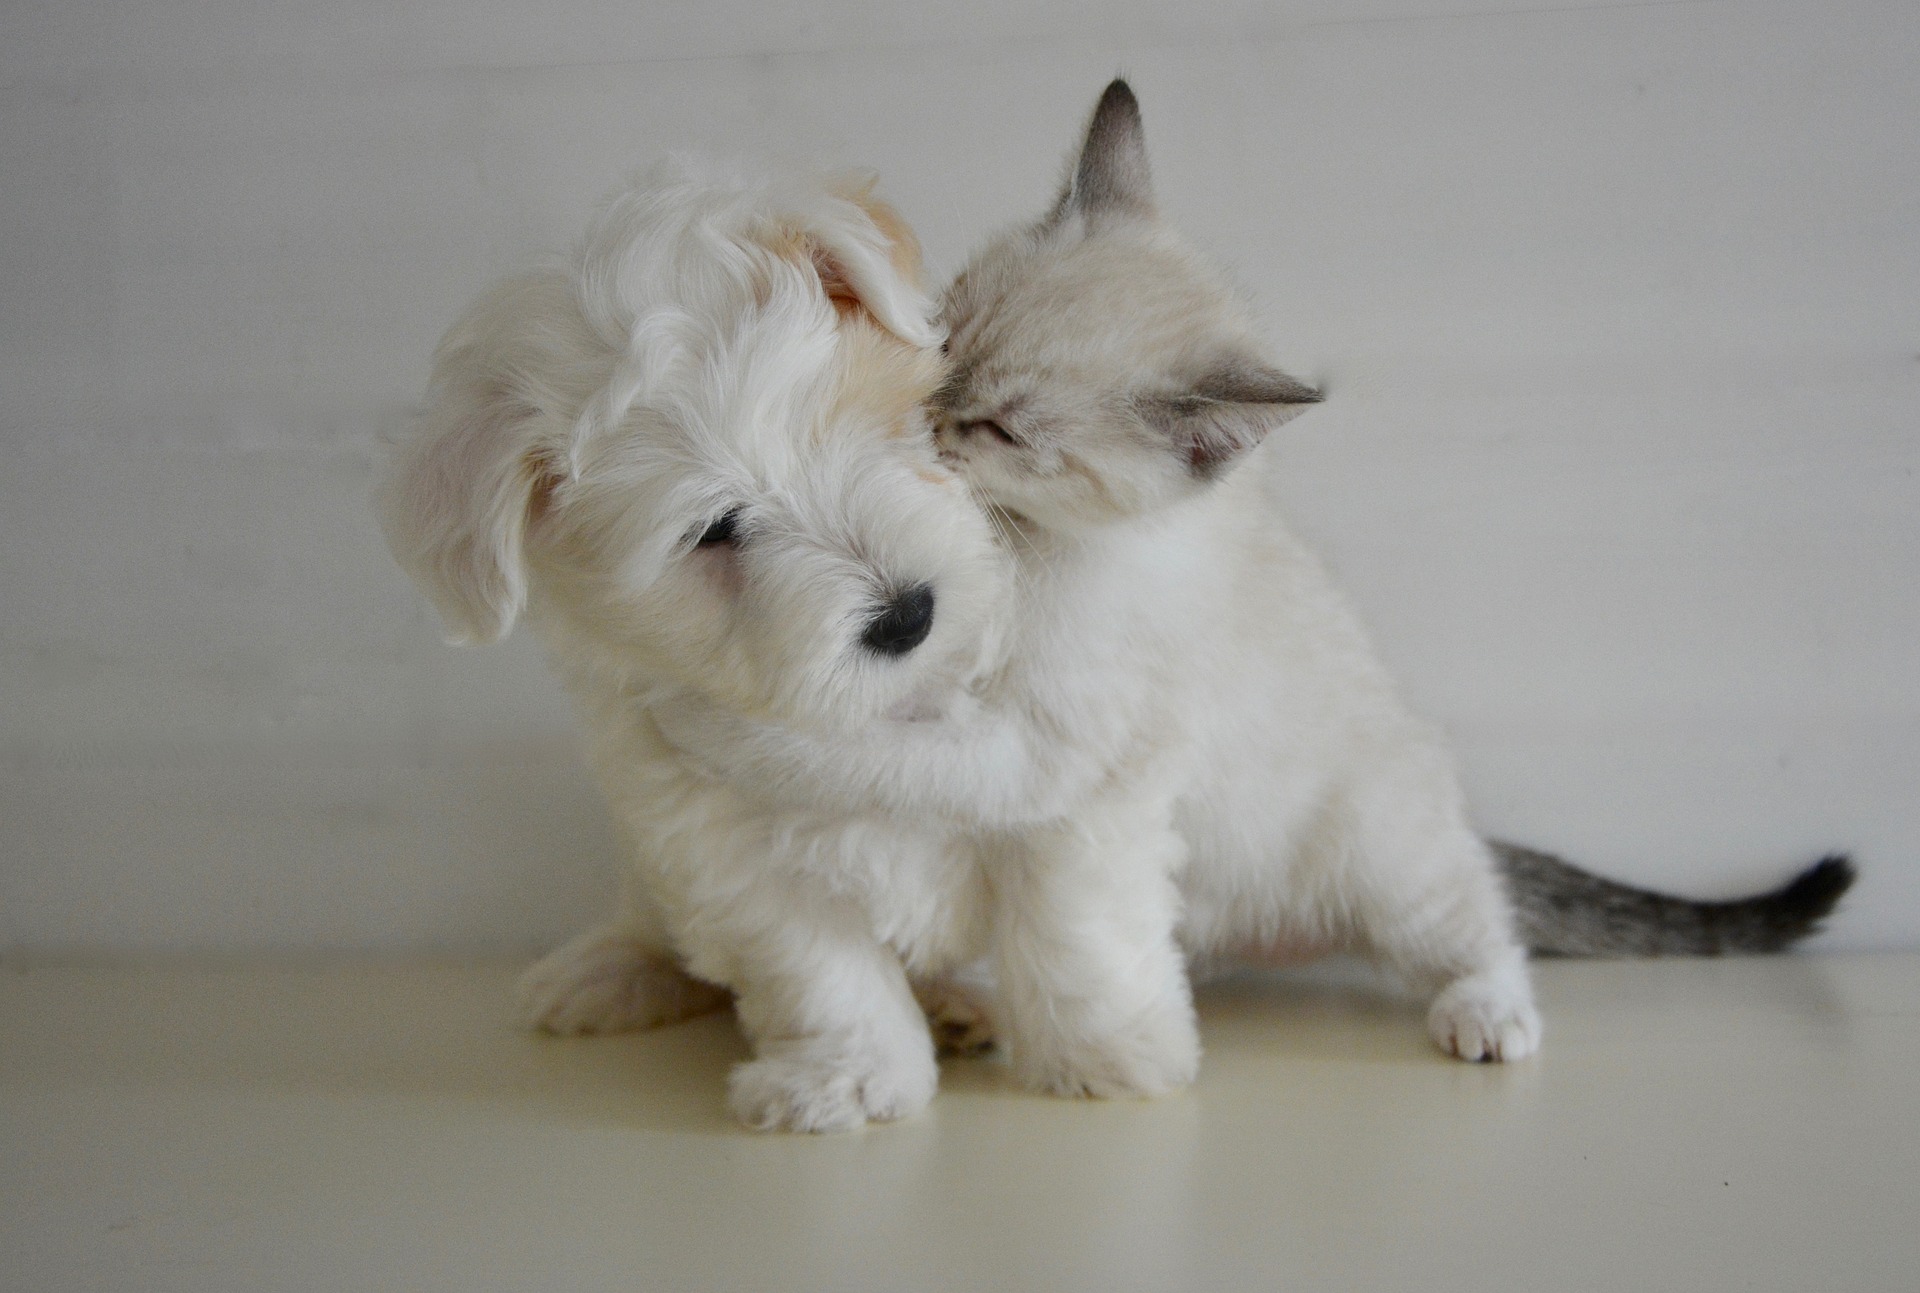 dog teeth falling out - puppy and kitten hugging